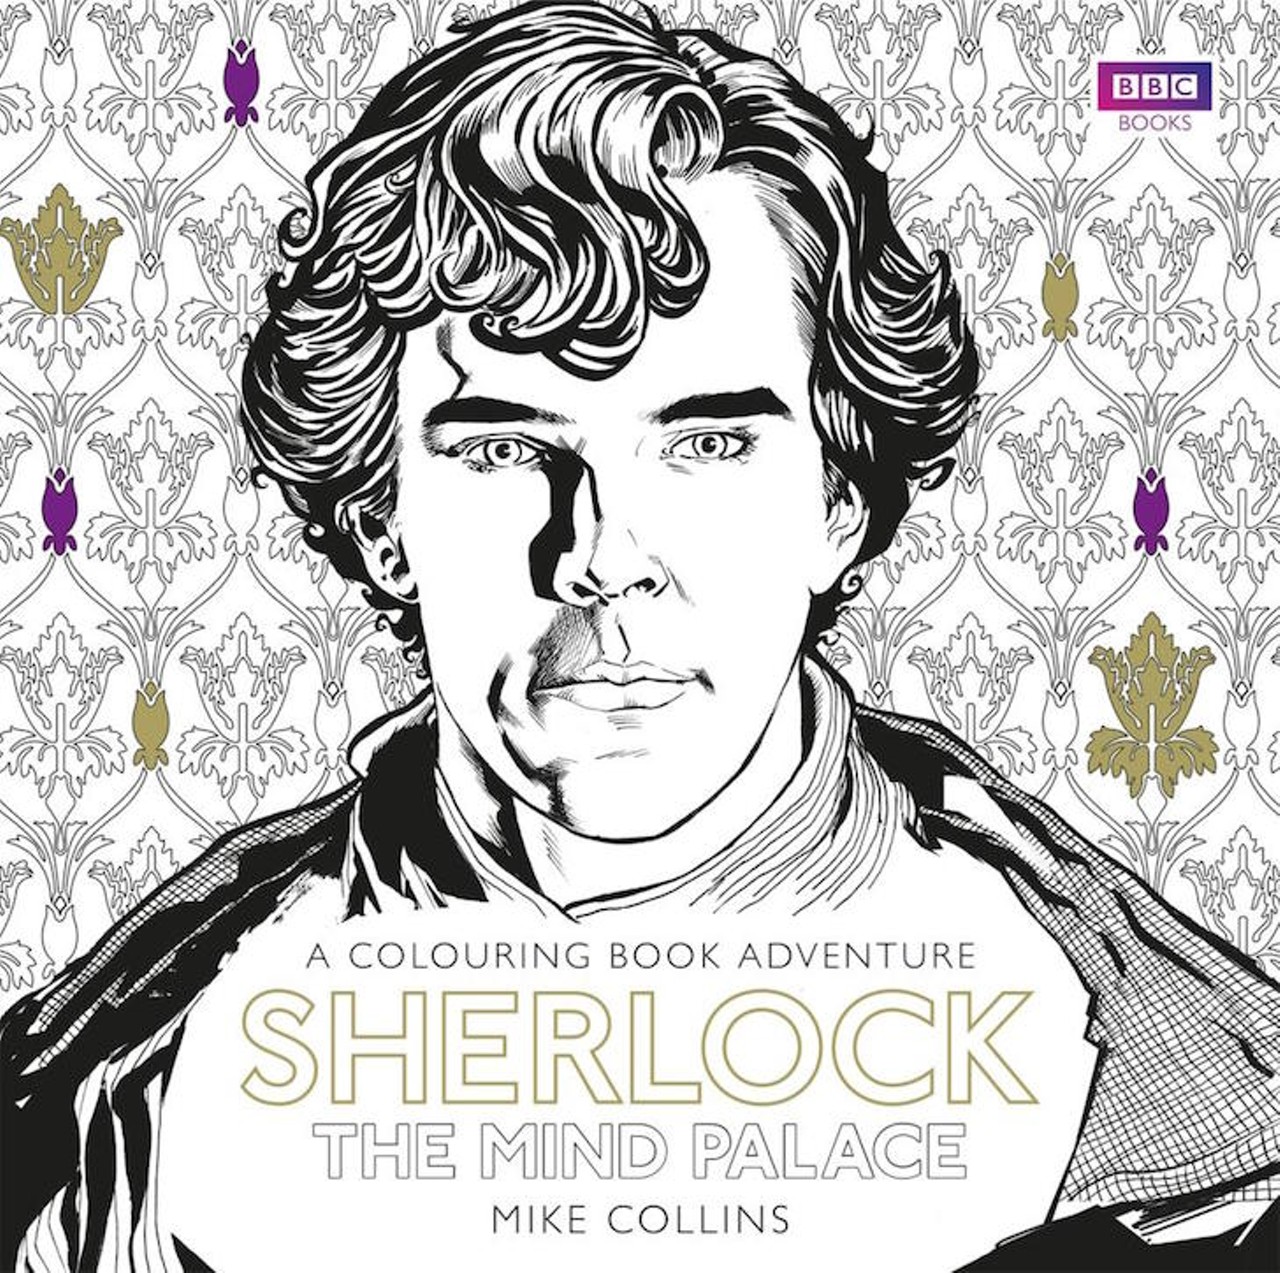  Sherlock: The Mind Palace
The game is on &#133; 
Buy it at amazon.com 